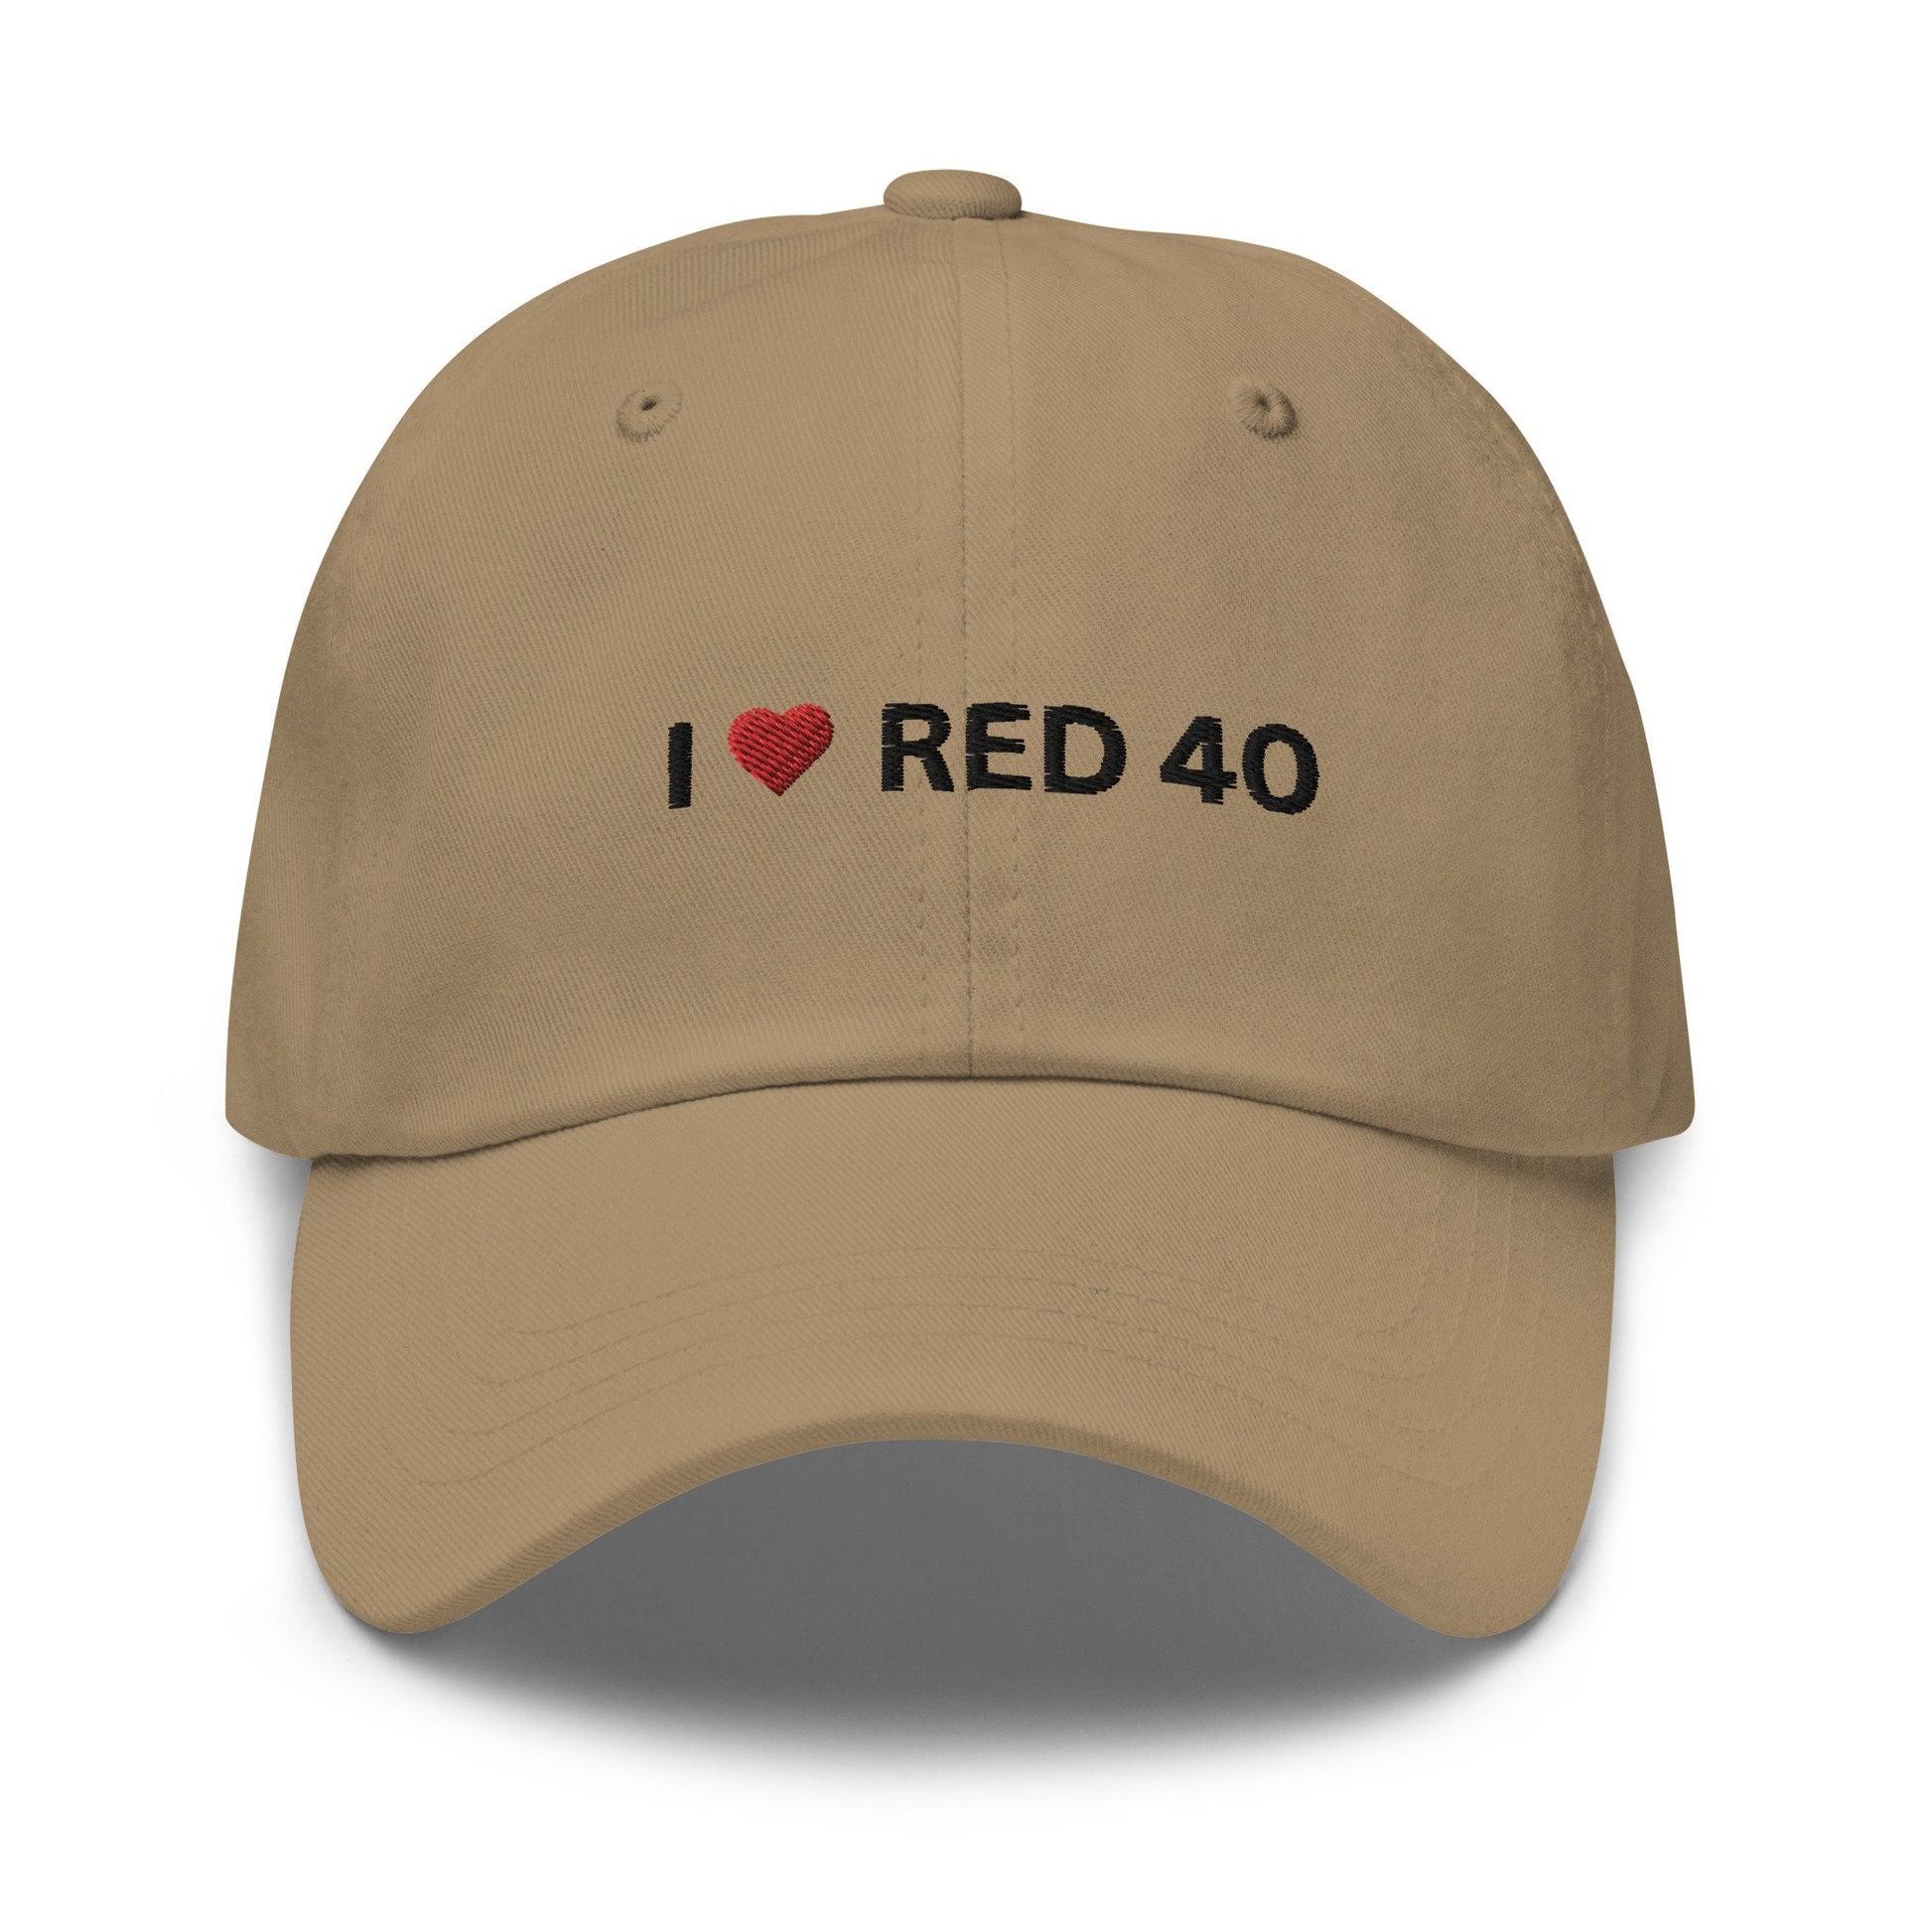 Red Dye 40 Hat - Health & Wellness - Cotton Embroidered Dad Cap